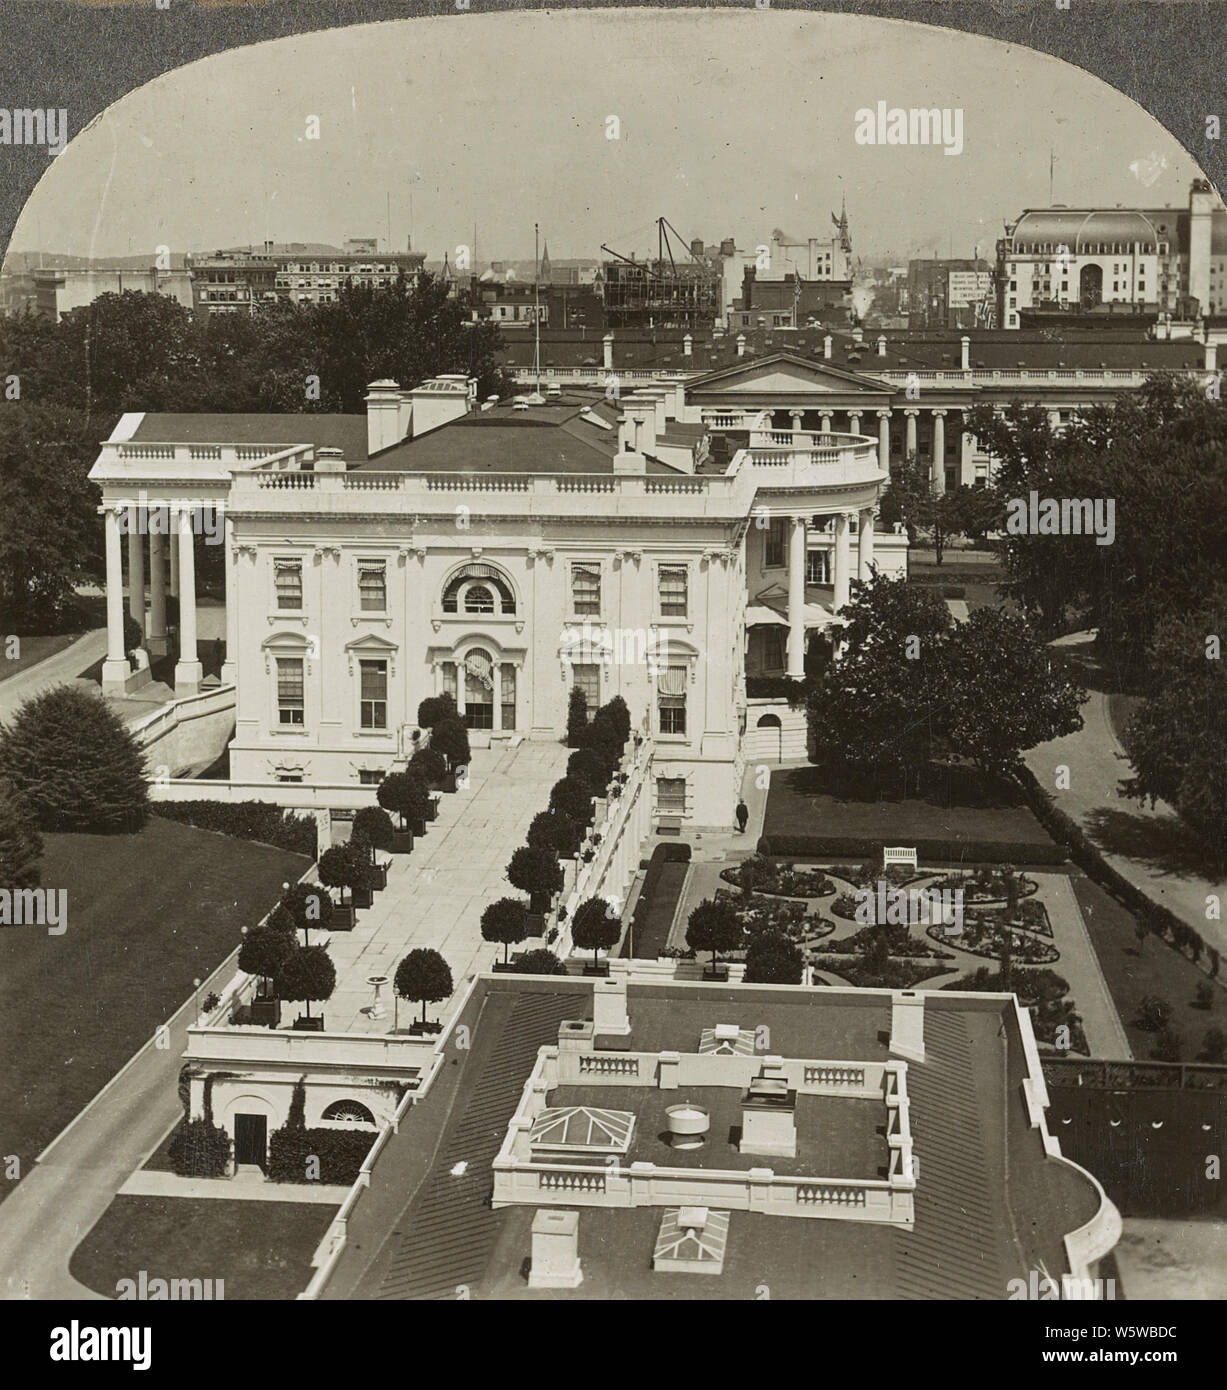 White House, Executive Offices and Treasury Building east from the Navy Dept., Washington, D.C. in 1926. The White House is the official residence and workplace of the president of the United States. It is located at 1600 Pennsylvania Avenue NW in Washington, D.C. and has been the residence of every U.S. president since John Adams in 1800. Stock Photo